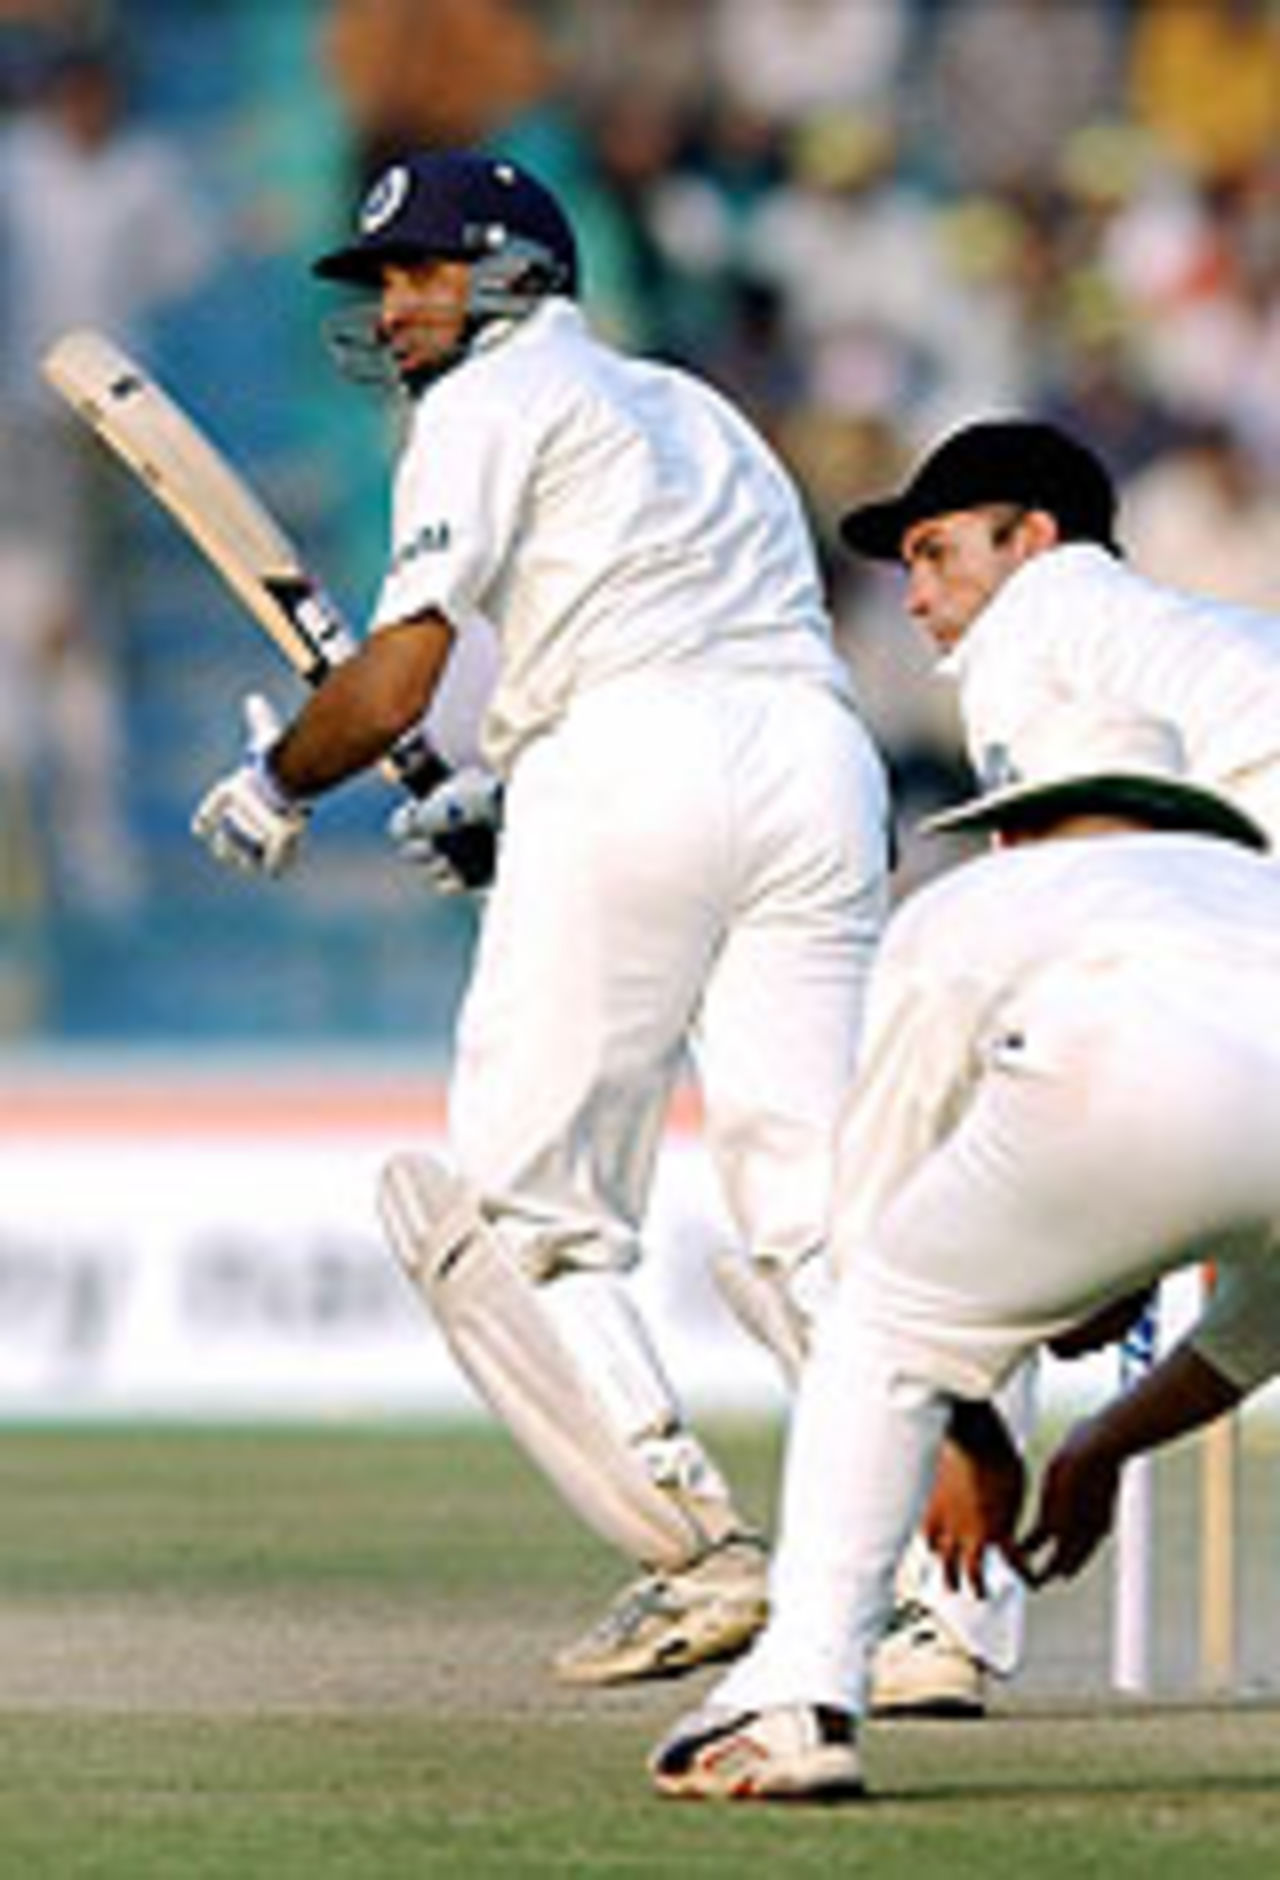 VVS Laxman on his way to a century, India v New Zealand, 5th Day, 2nd Test, Mohali, October 20, 2003